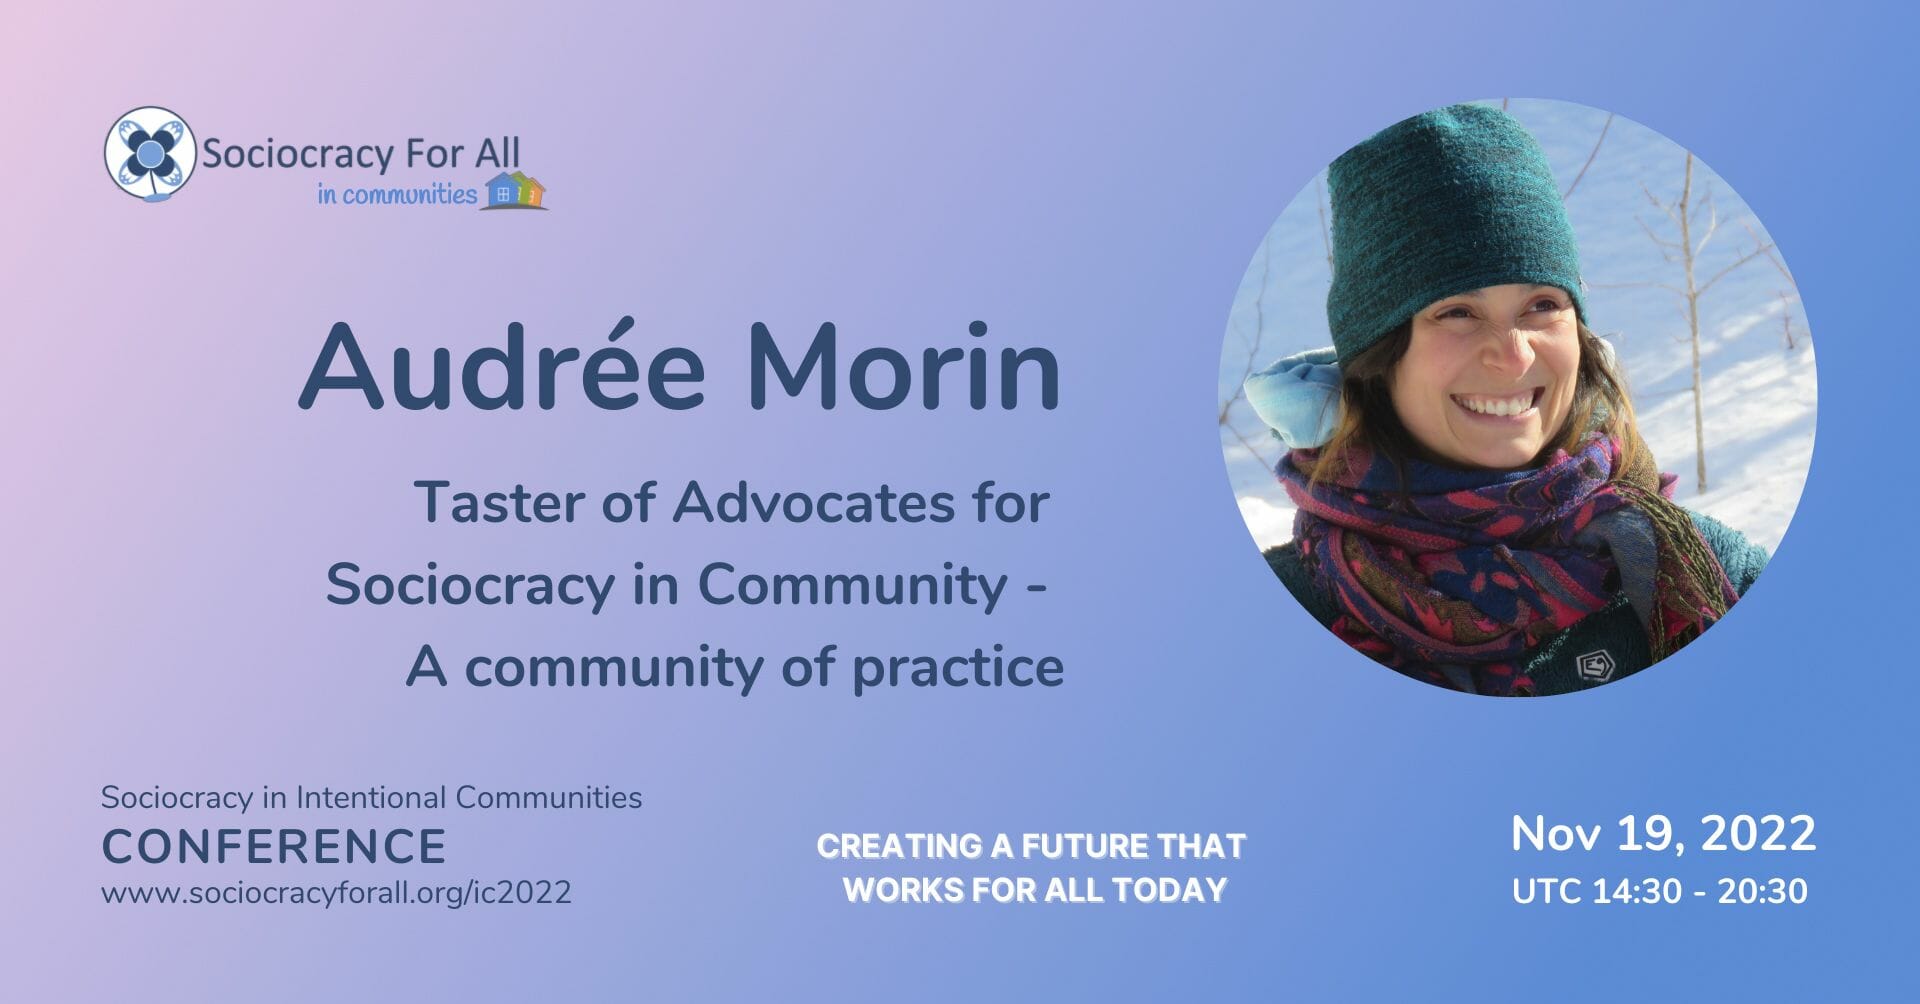 audree morin sociocracy in intentional communities conference 2022 - - Sociocracy For All